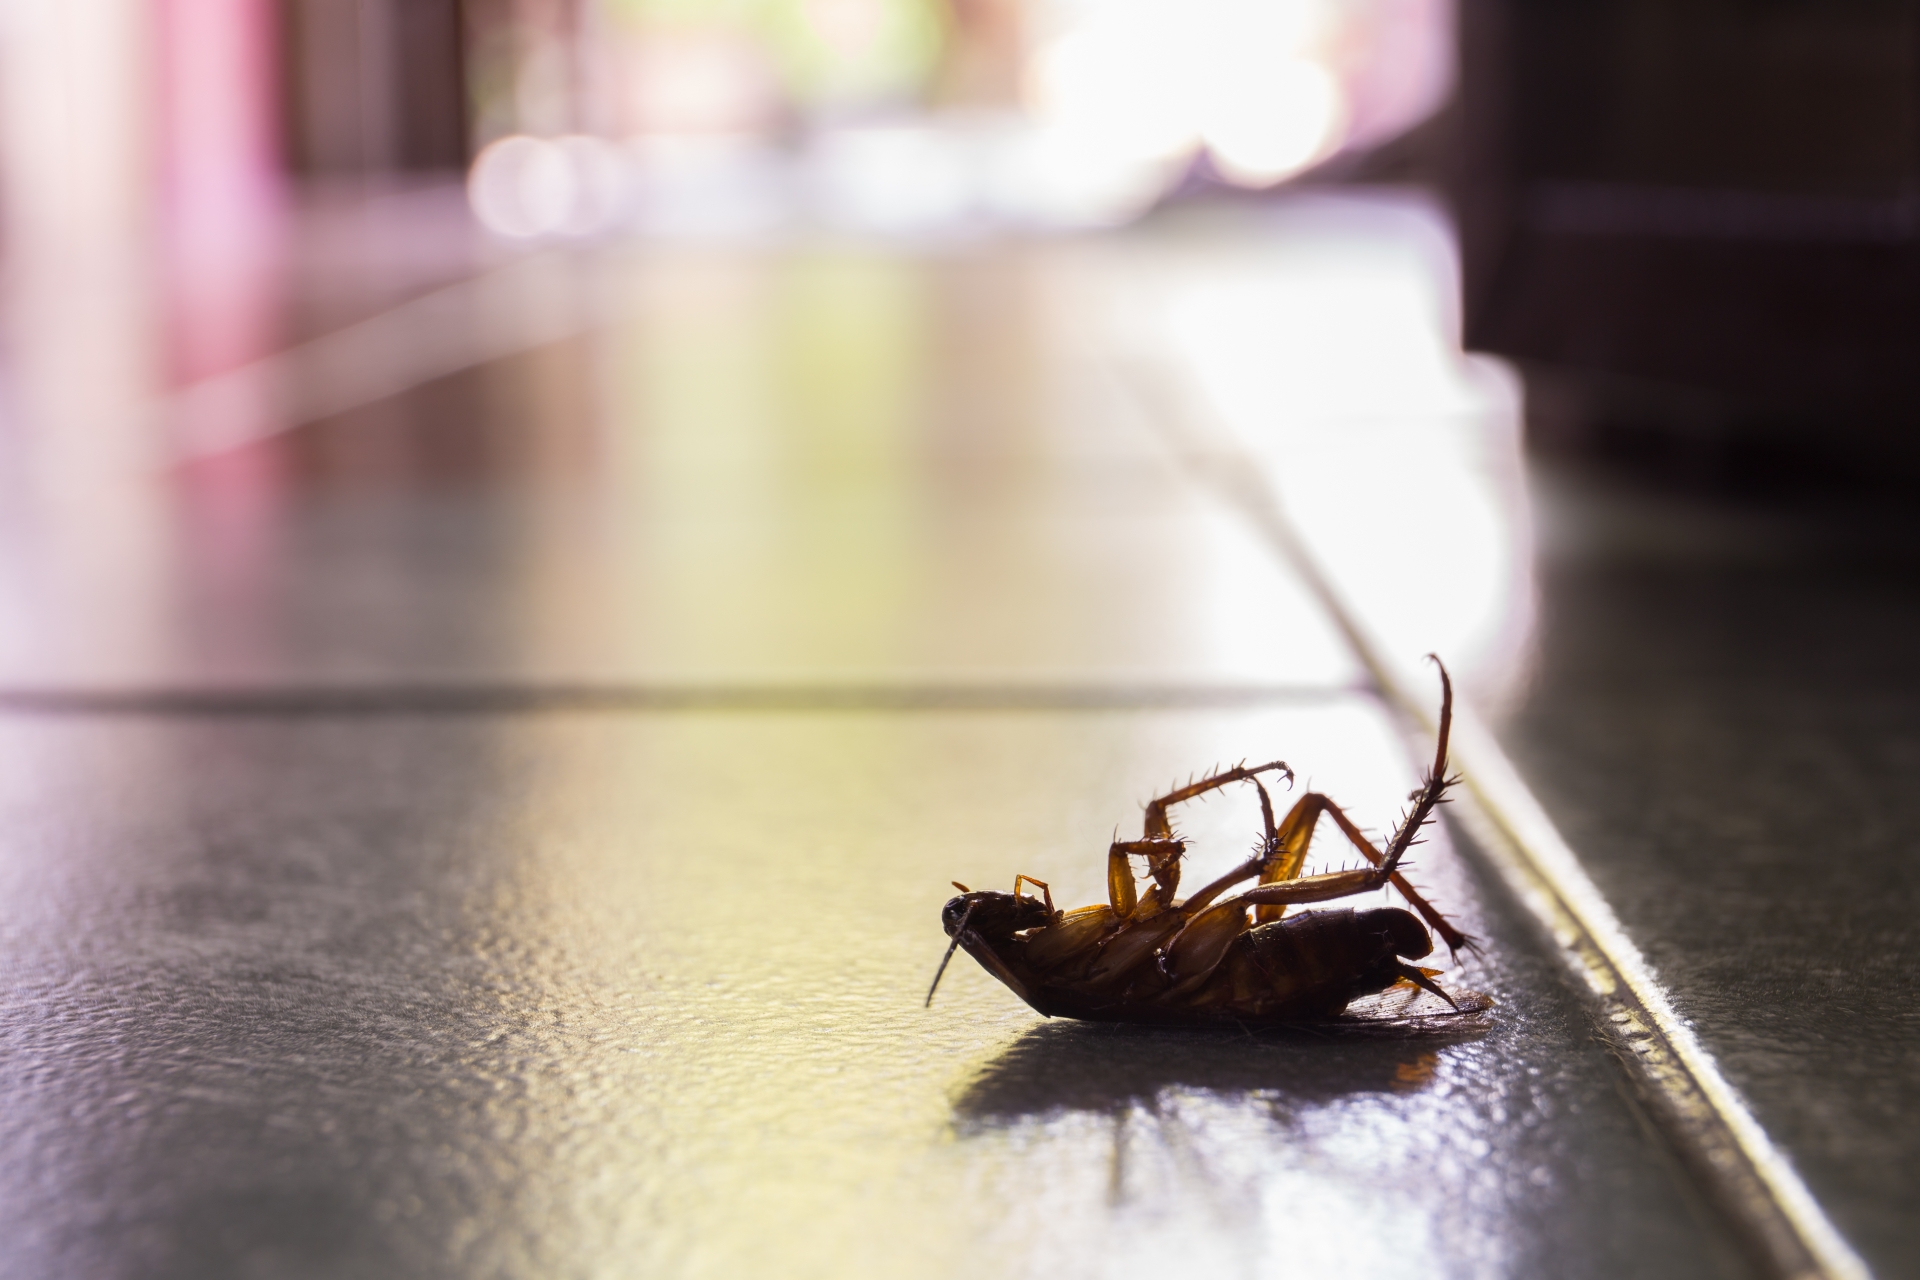 Cockroach Control, Pest Control in Loughton, High Beach, IG10. Call Now 020 8166 9746